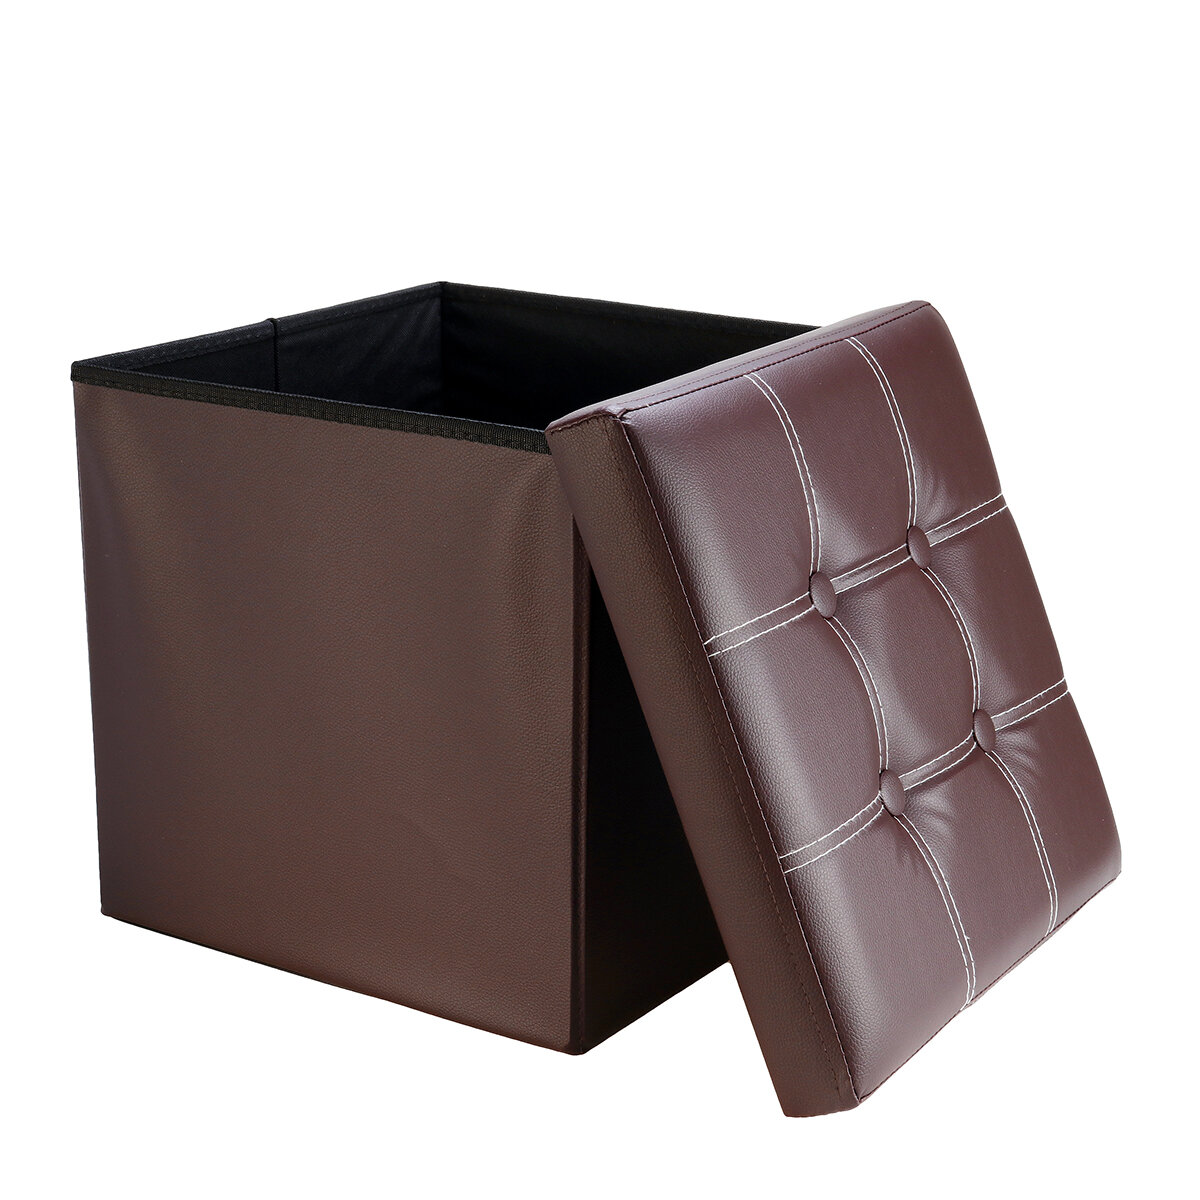 PU Leather Storage Stool Multifunctional Sofa Ottoman Footrest Box Seat Footstool Square Chair Home Office Furniture